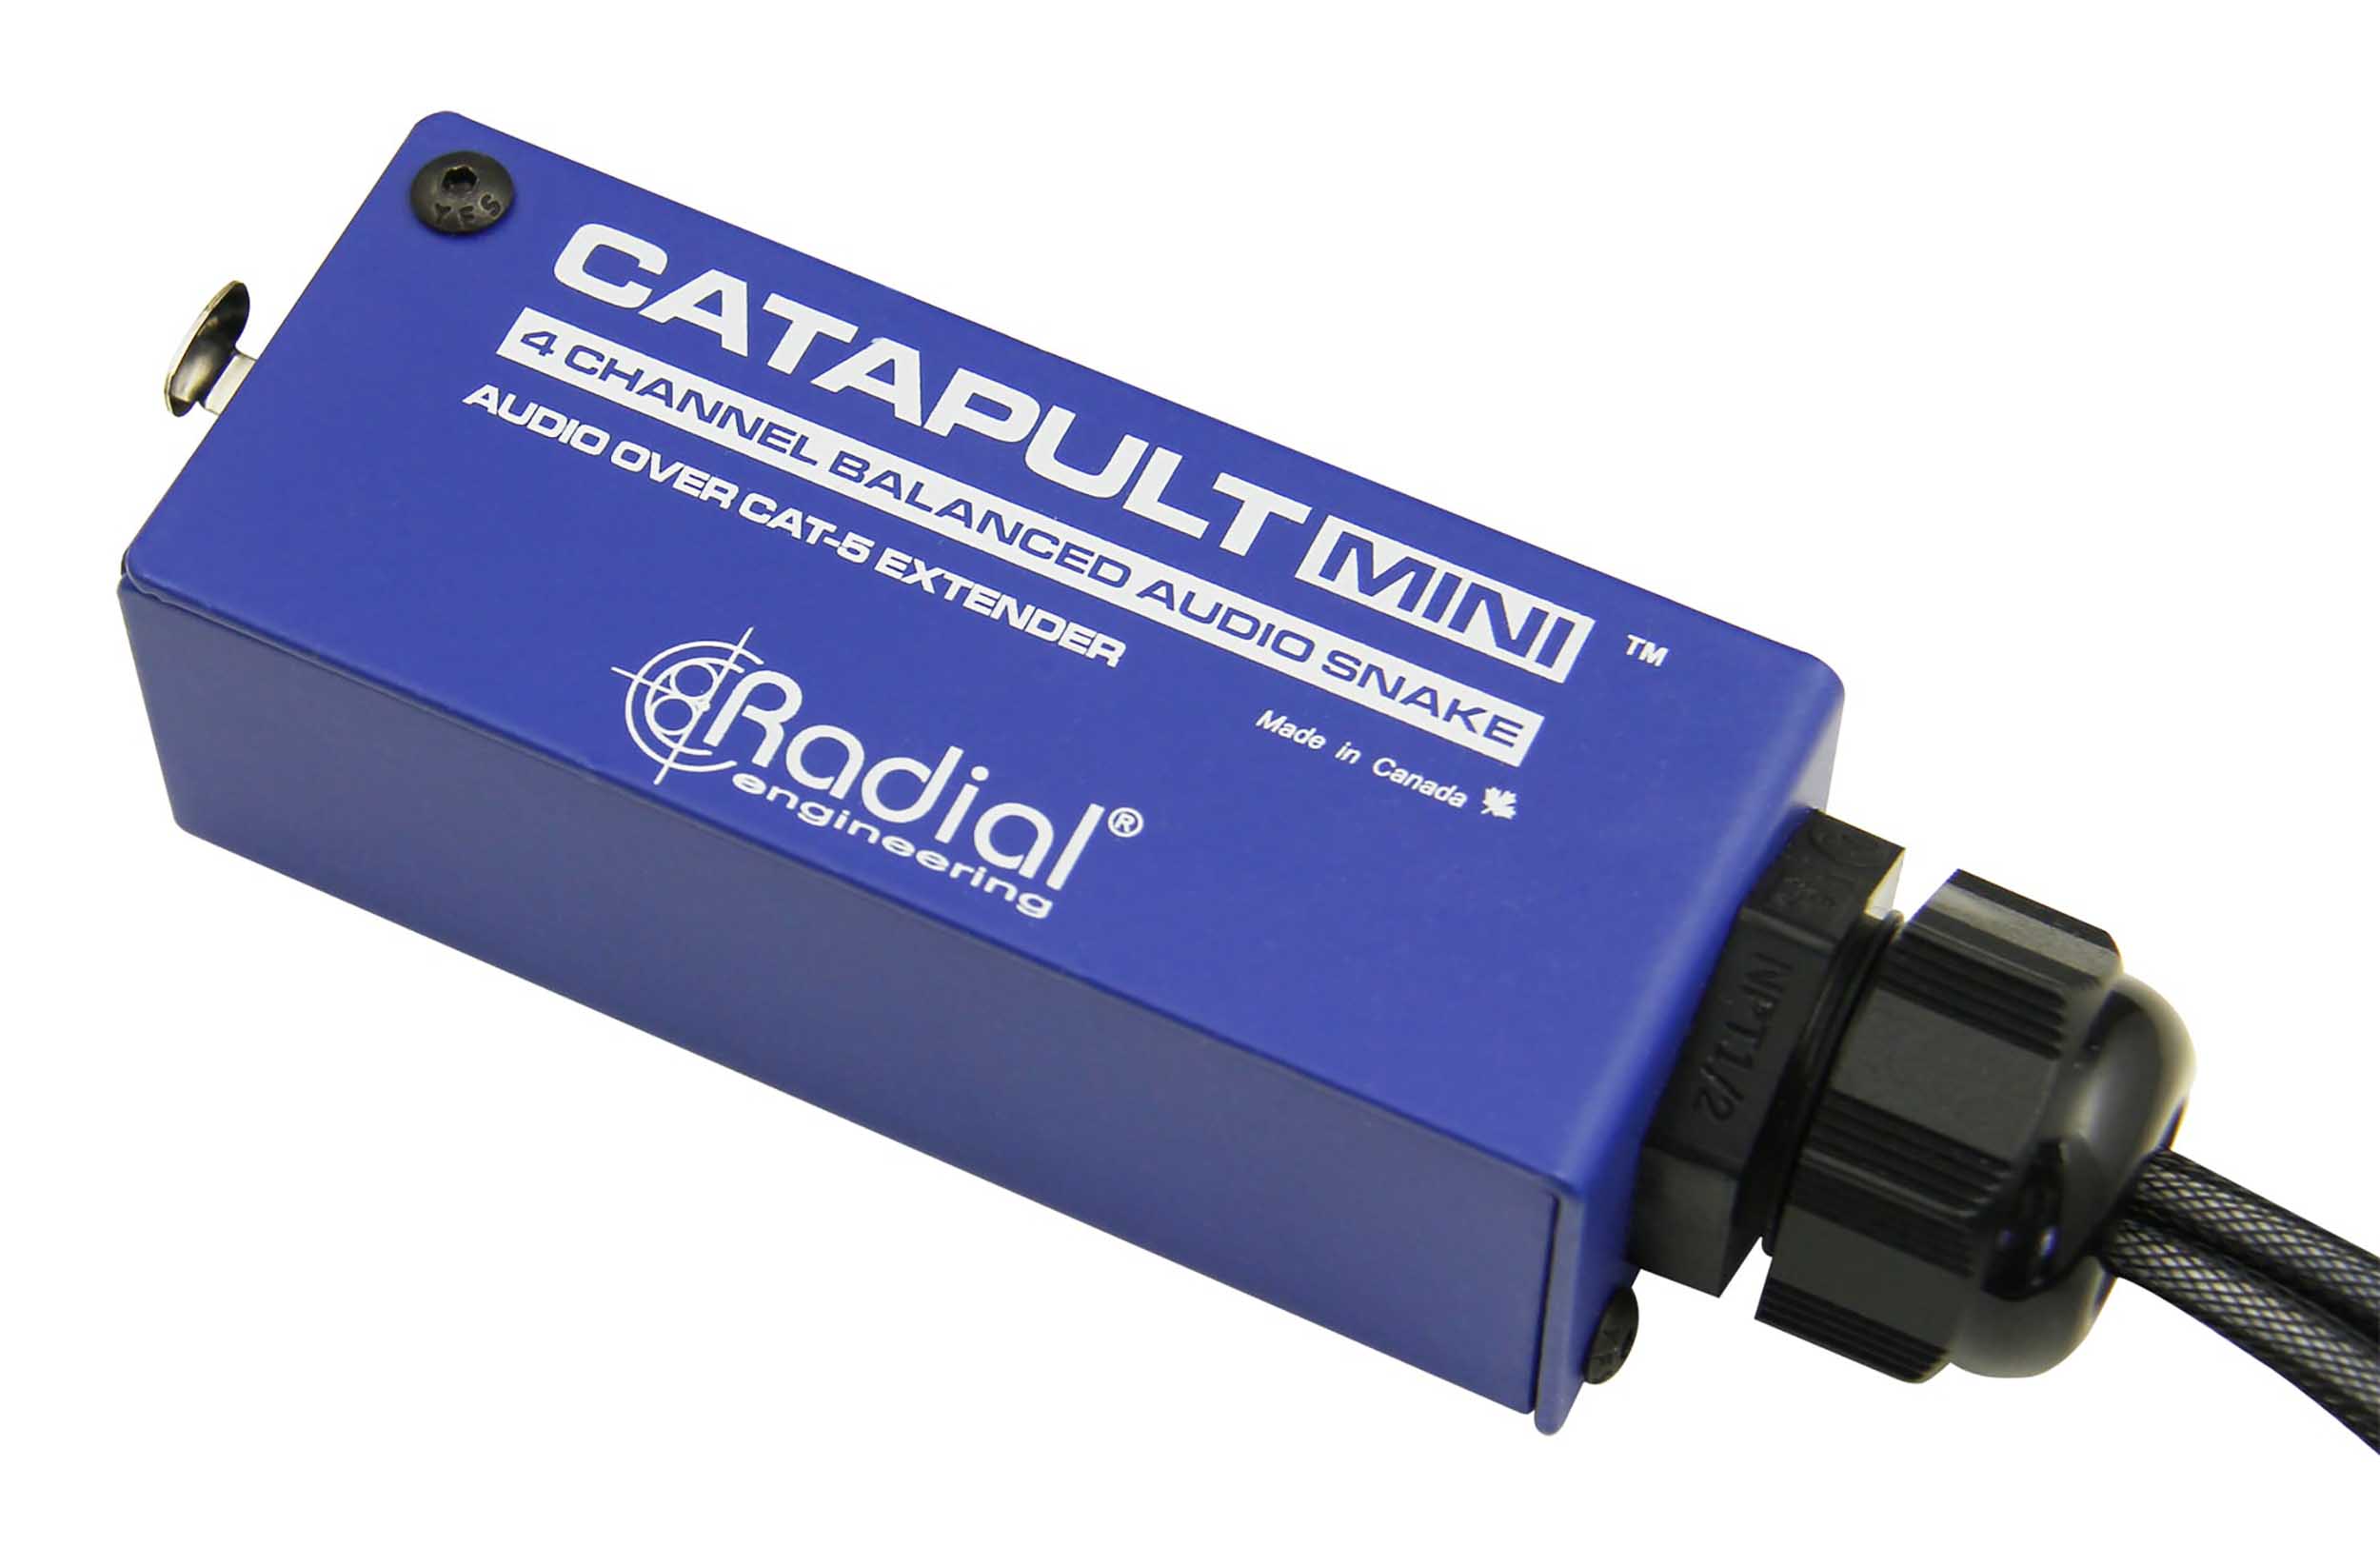 Radial Engineering Catapult Mini 4-Channel Cat 5 Audio Snake by Radial Engineering